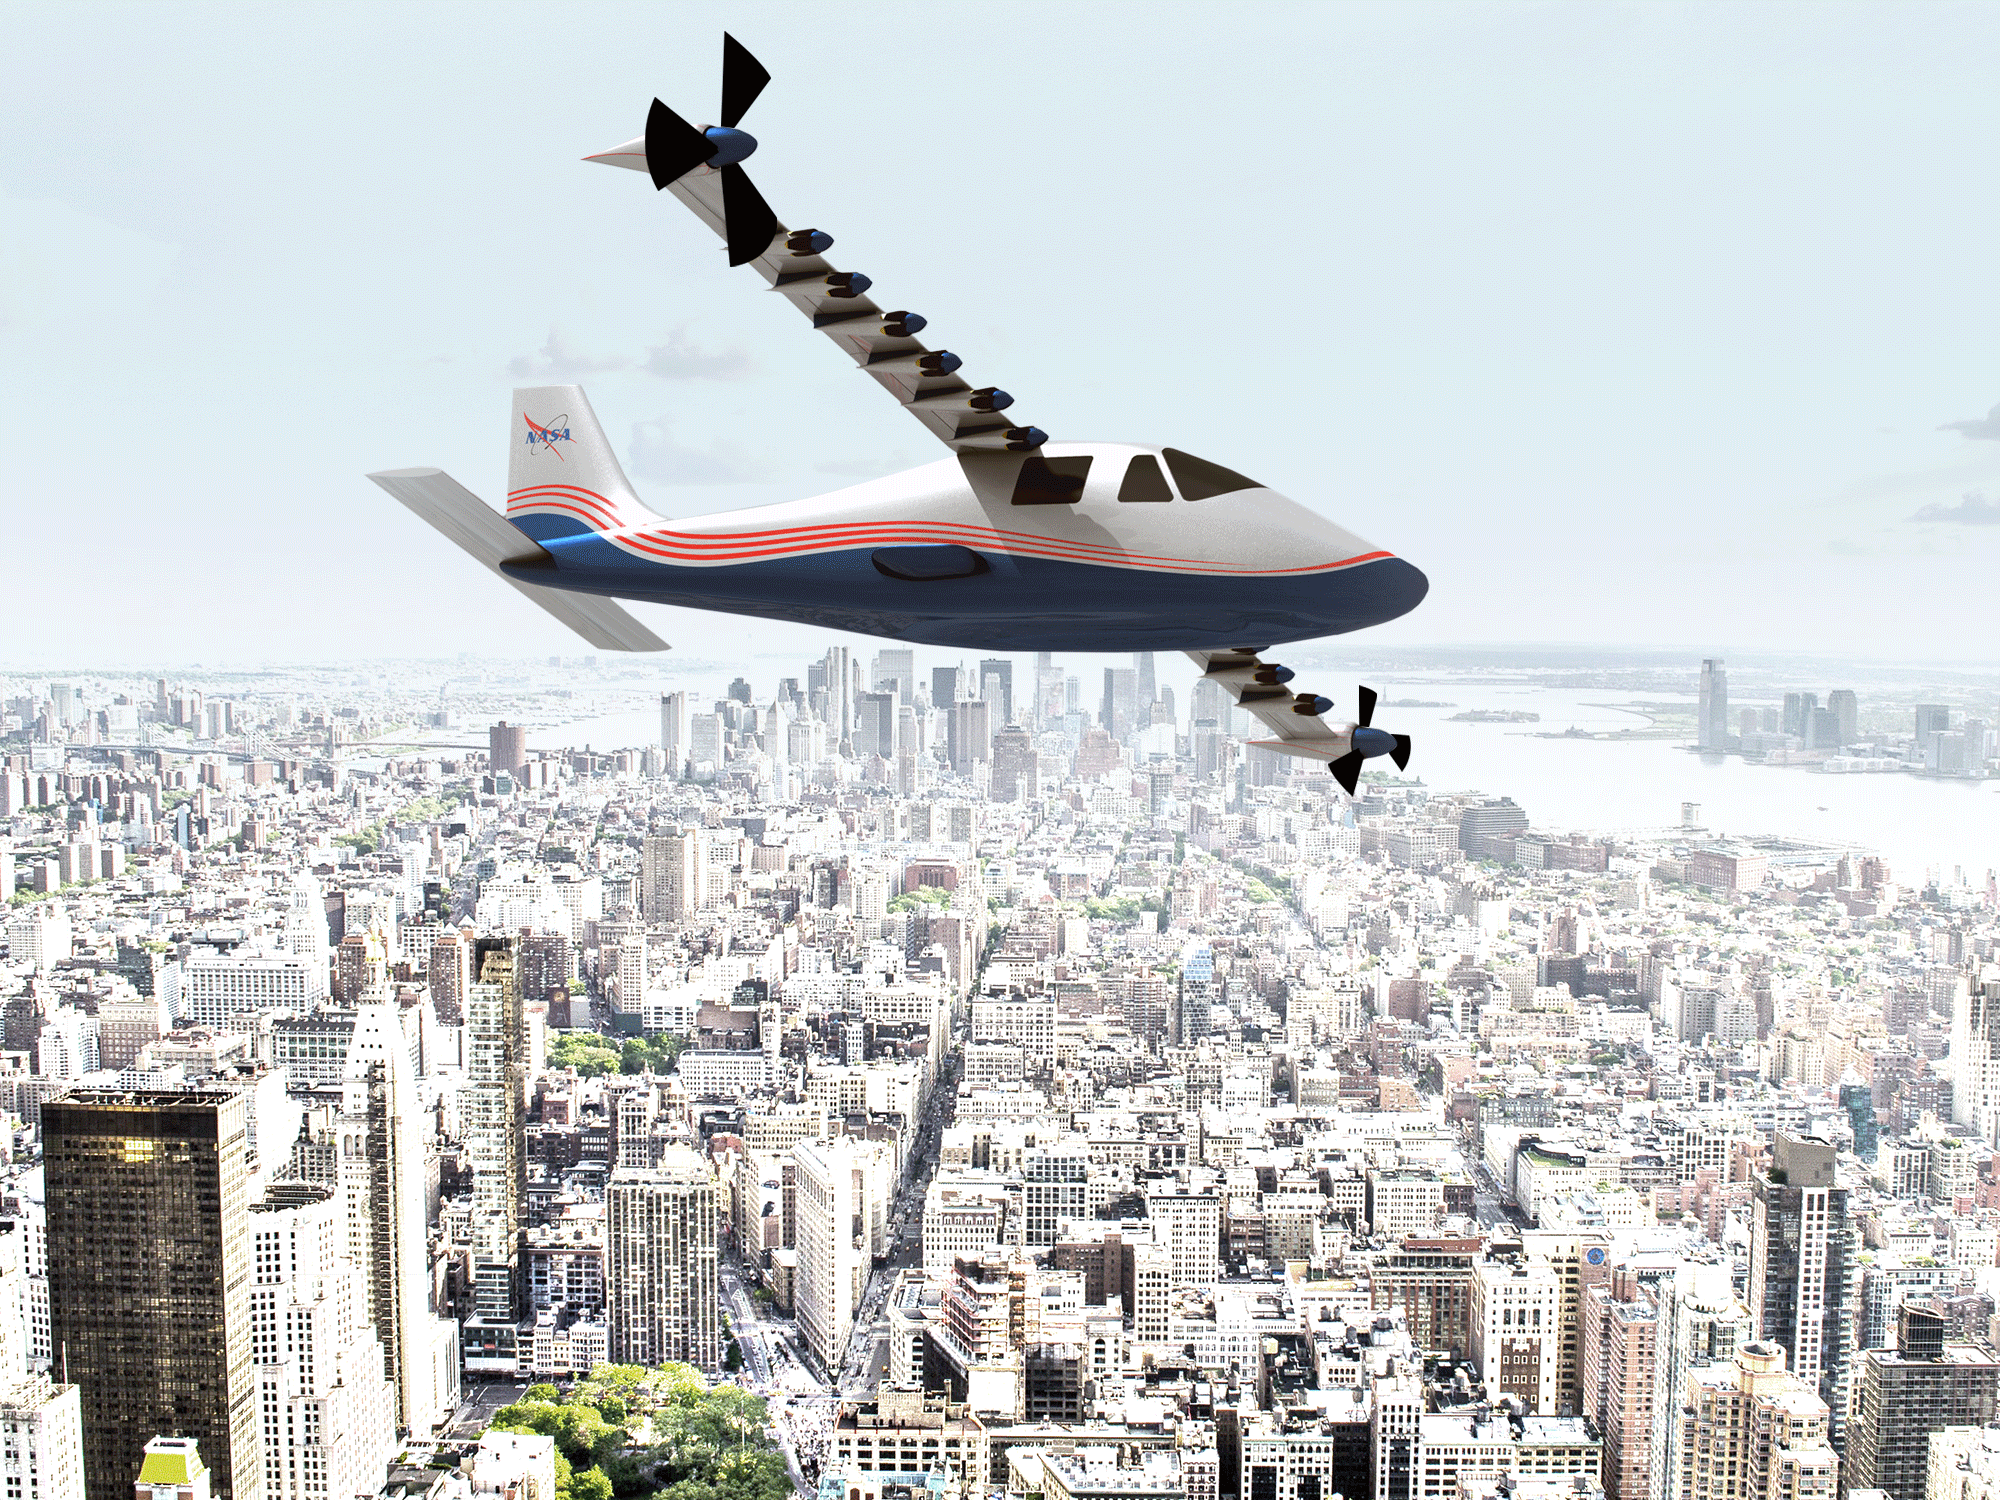 Animation of an Artist concept X-57 in flight over a cityscape. 